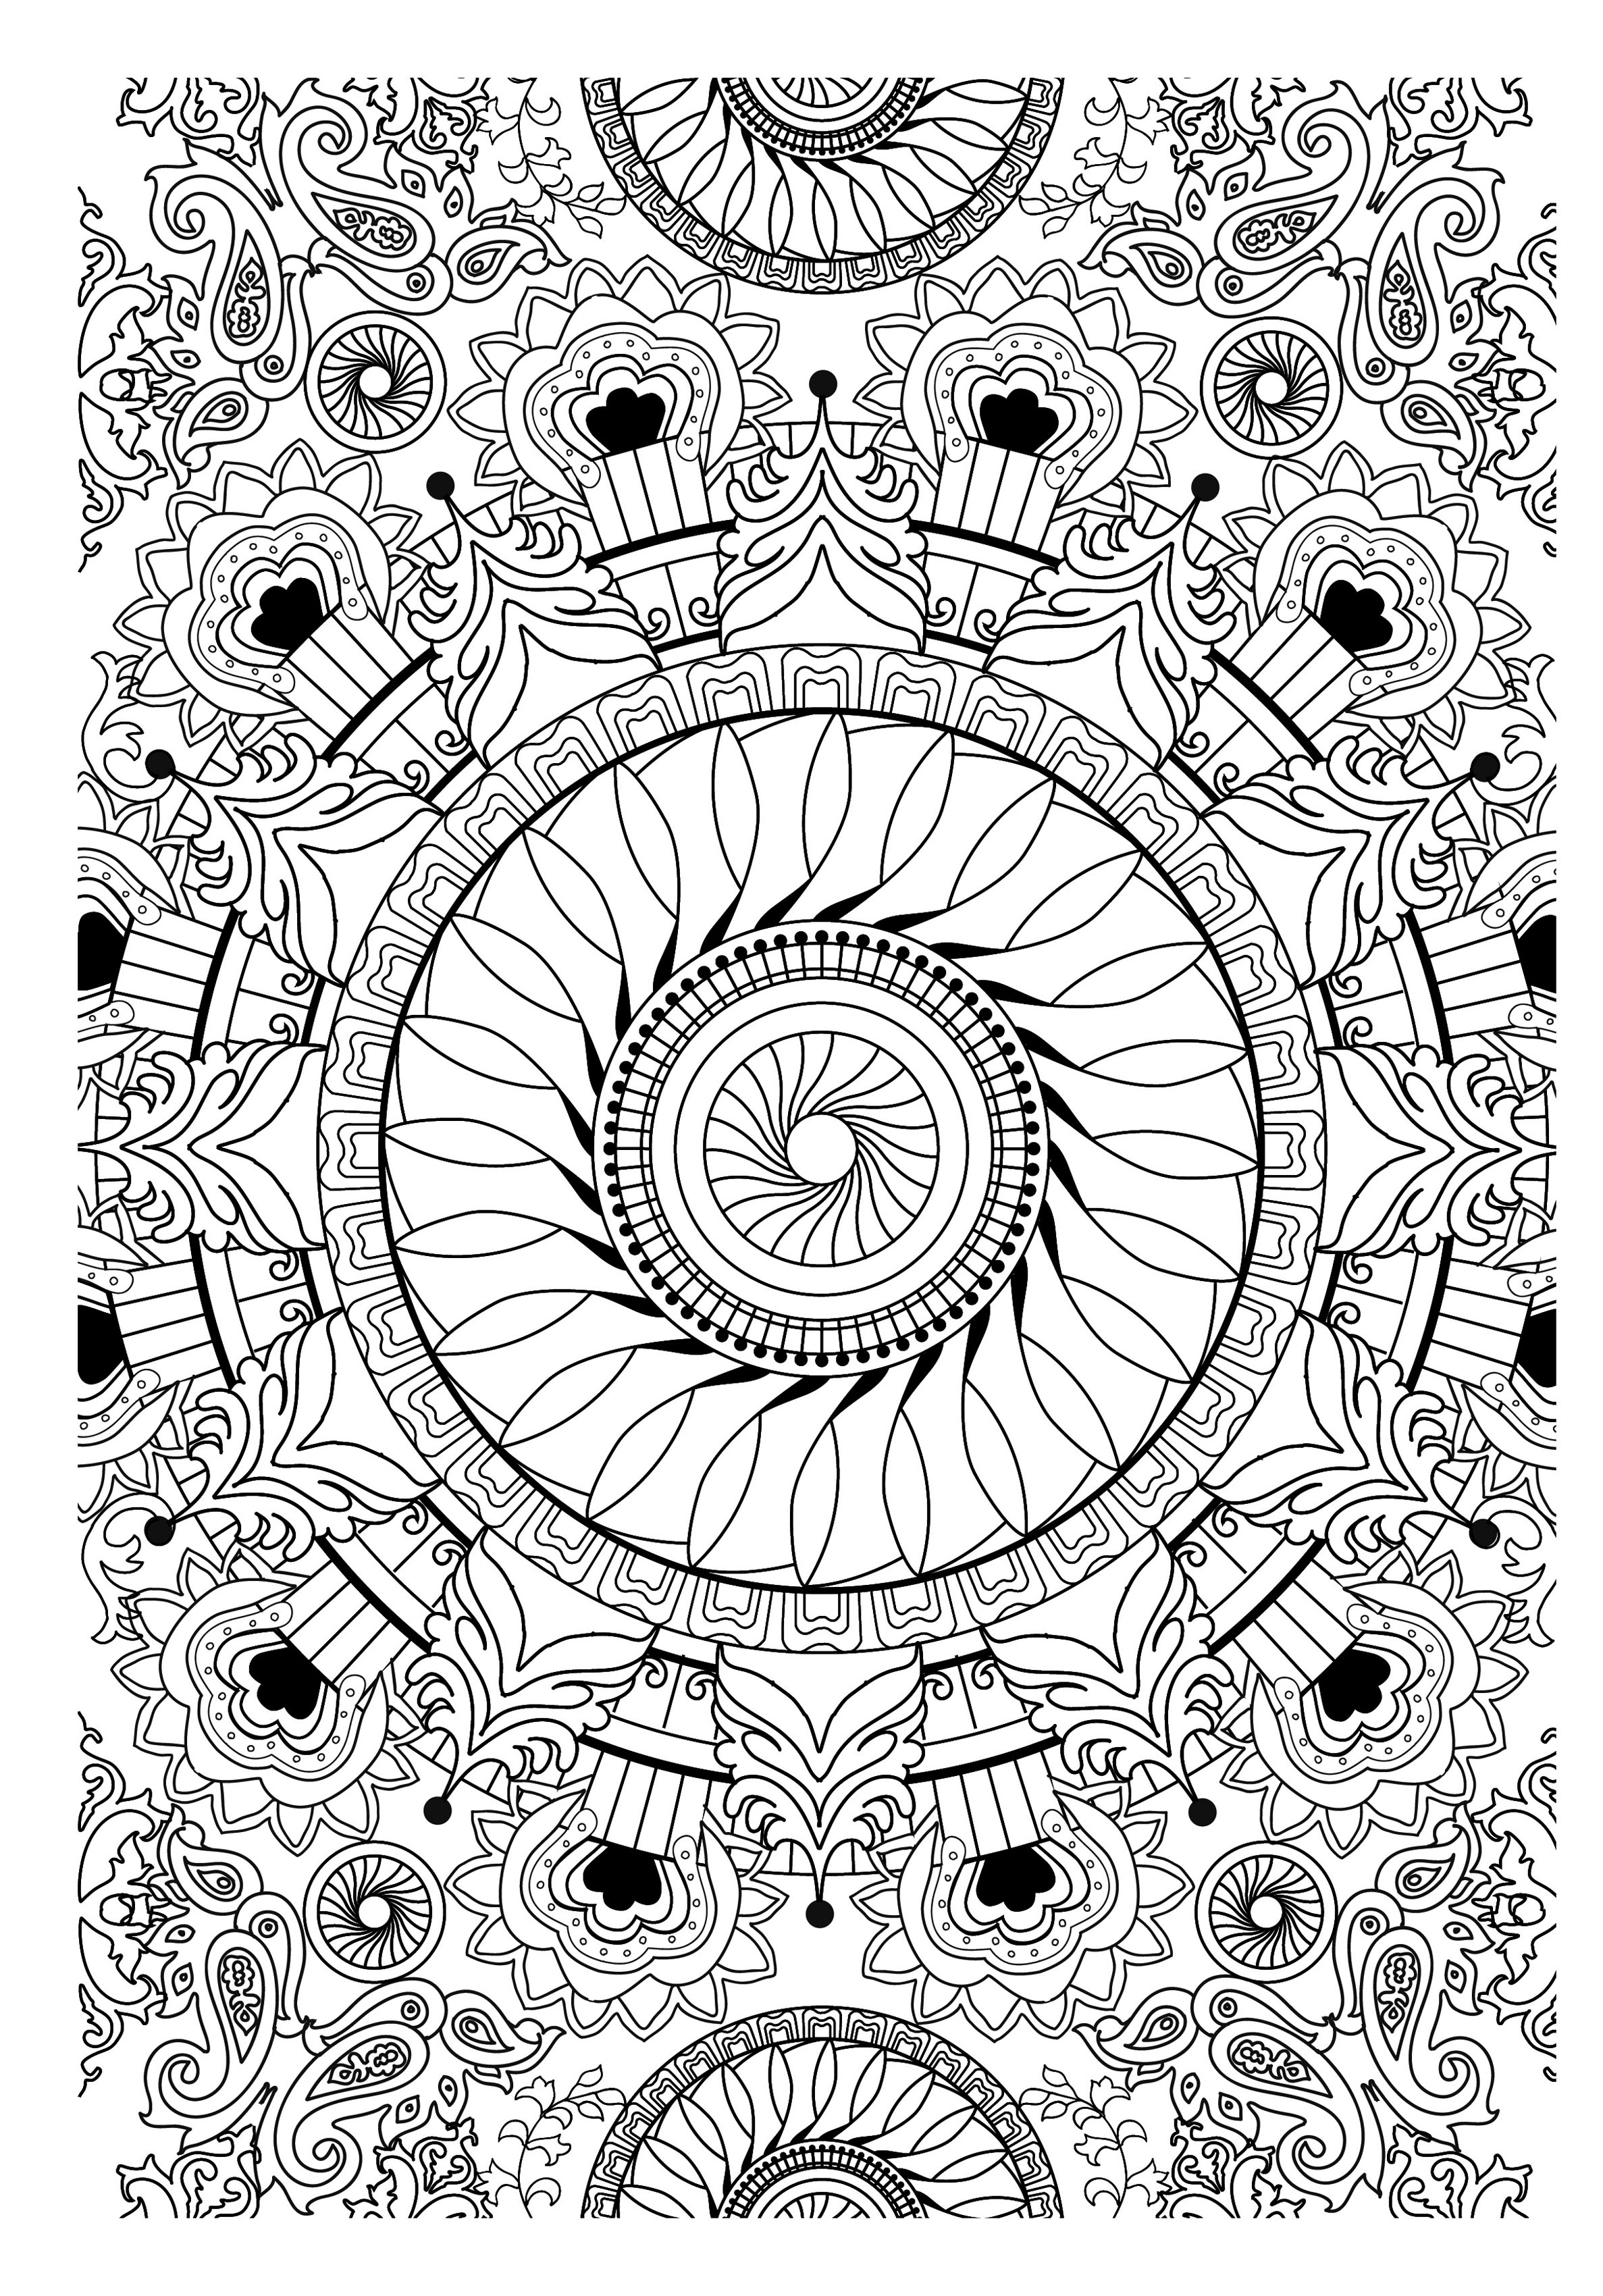 Mandala to color difficult - 33